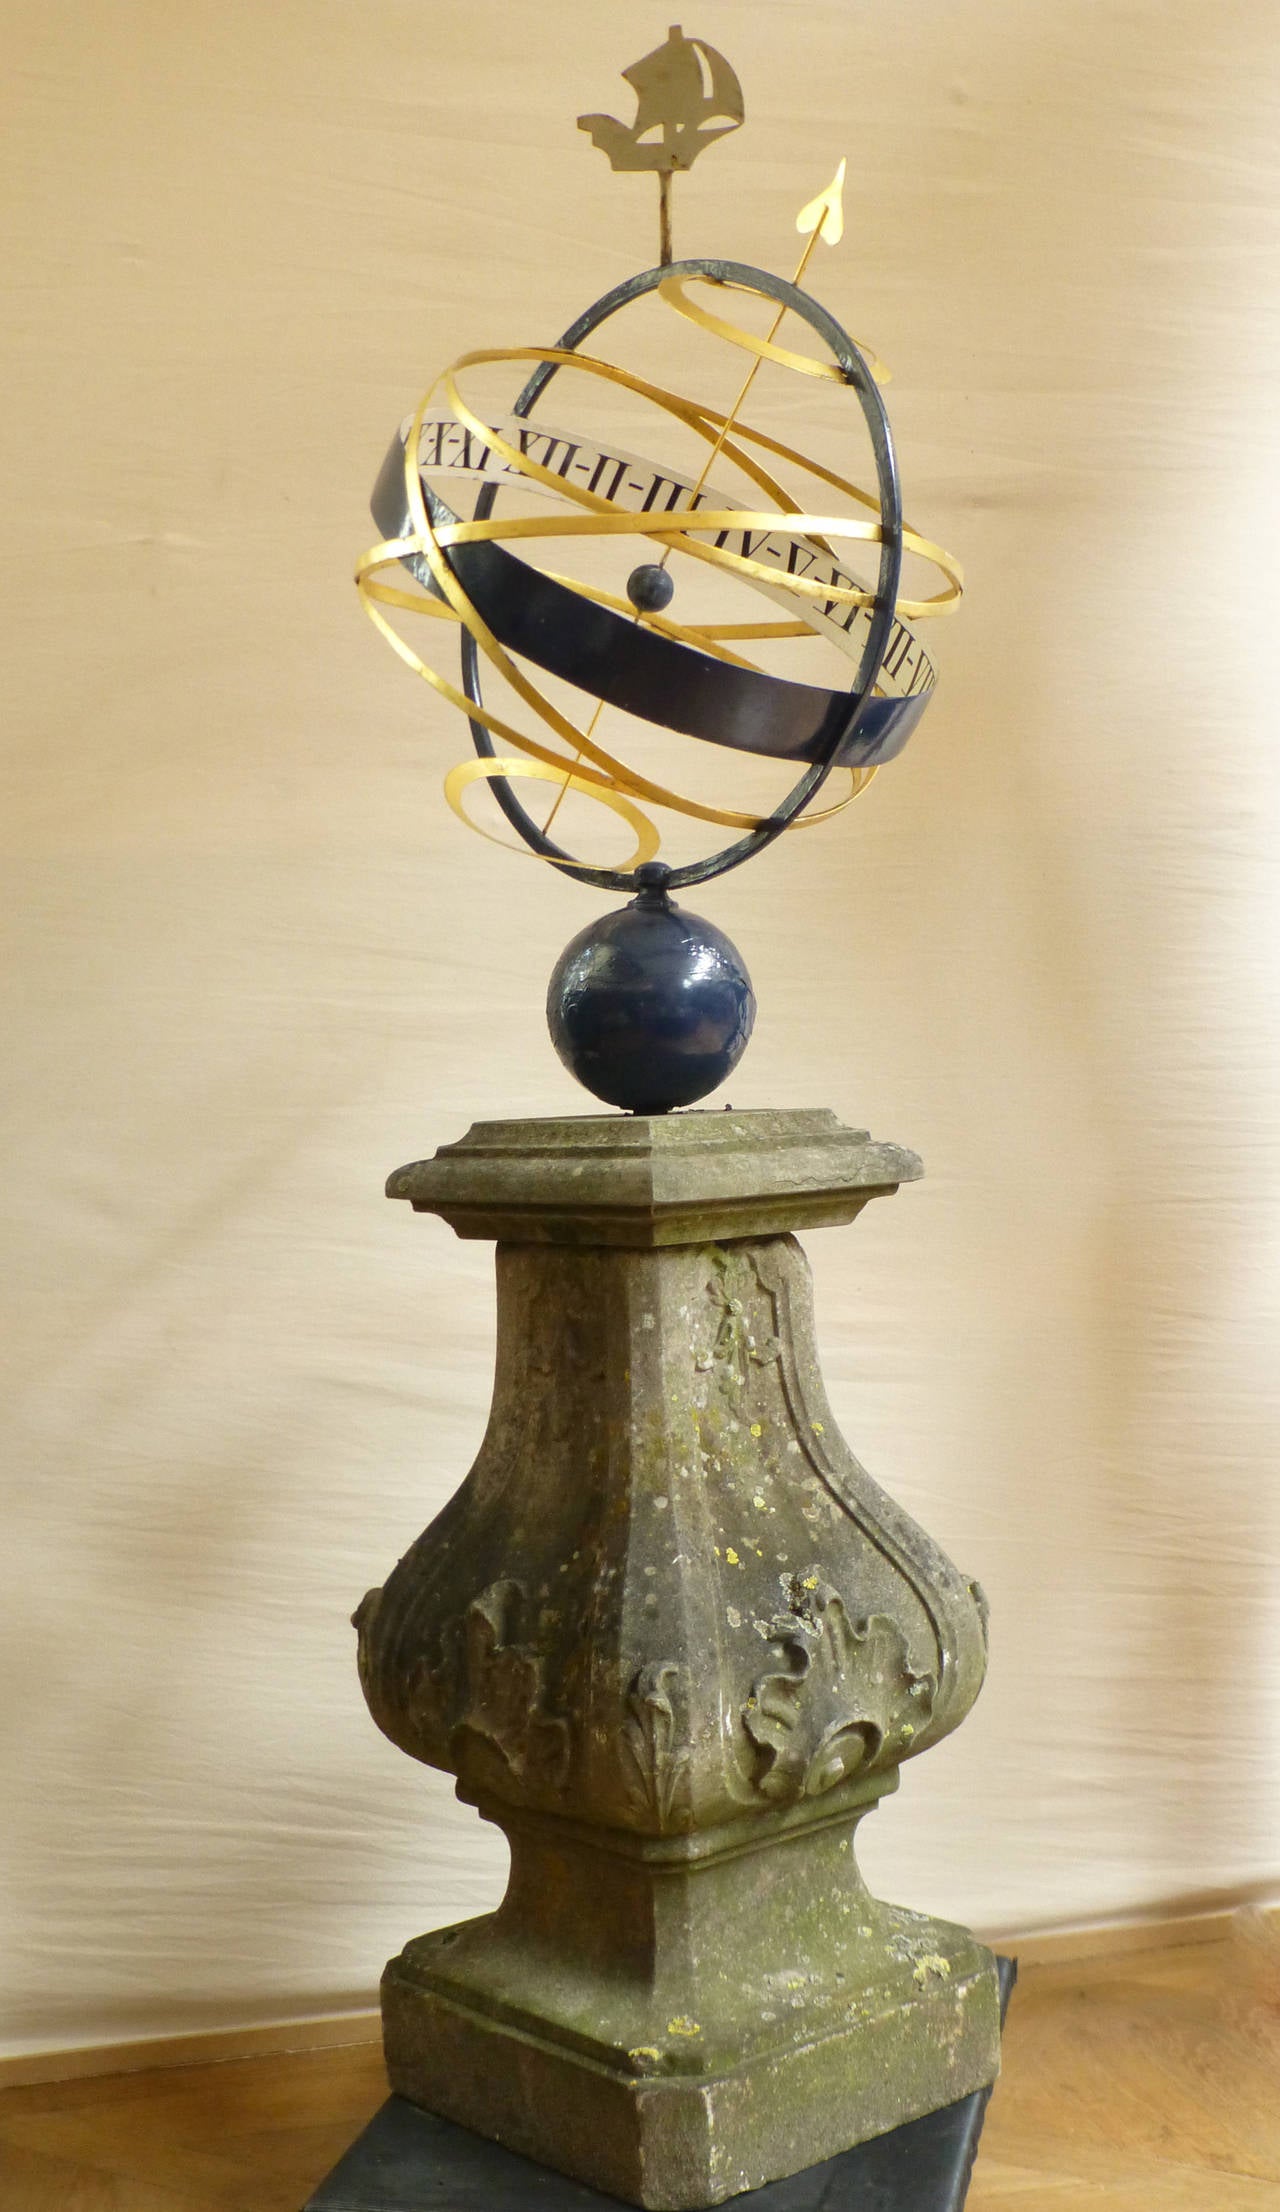 With iron armillary sphere.

In the 18th century the armillary sundial became popular. It was favored because of its ornamental appearance in the garden. More sculpture than timepiece, it’s closely akin to the horological or time-telling sphere.